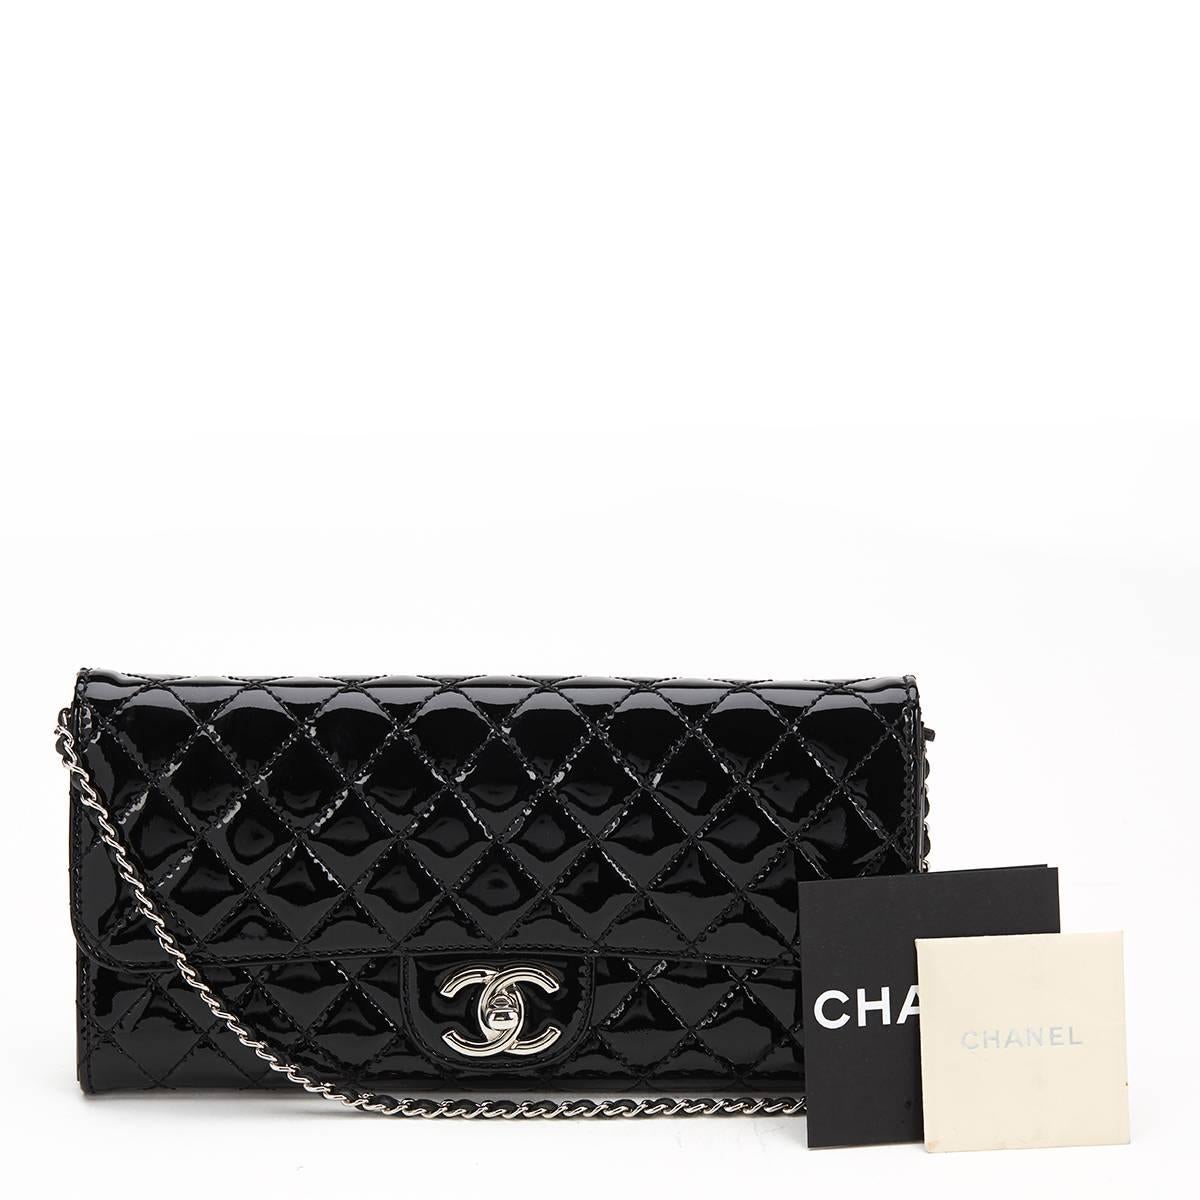 2014 Chanel Black Patent Leather Wallet-on-Chain WOC 6